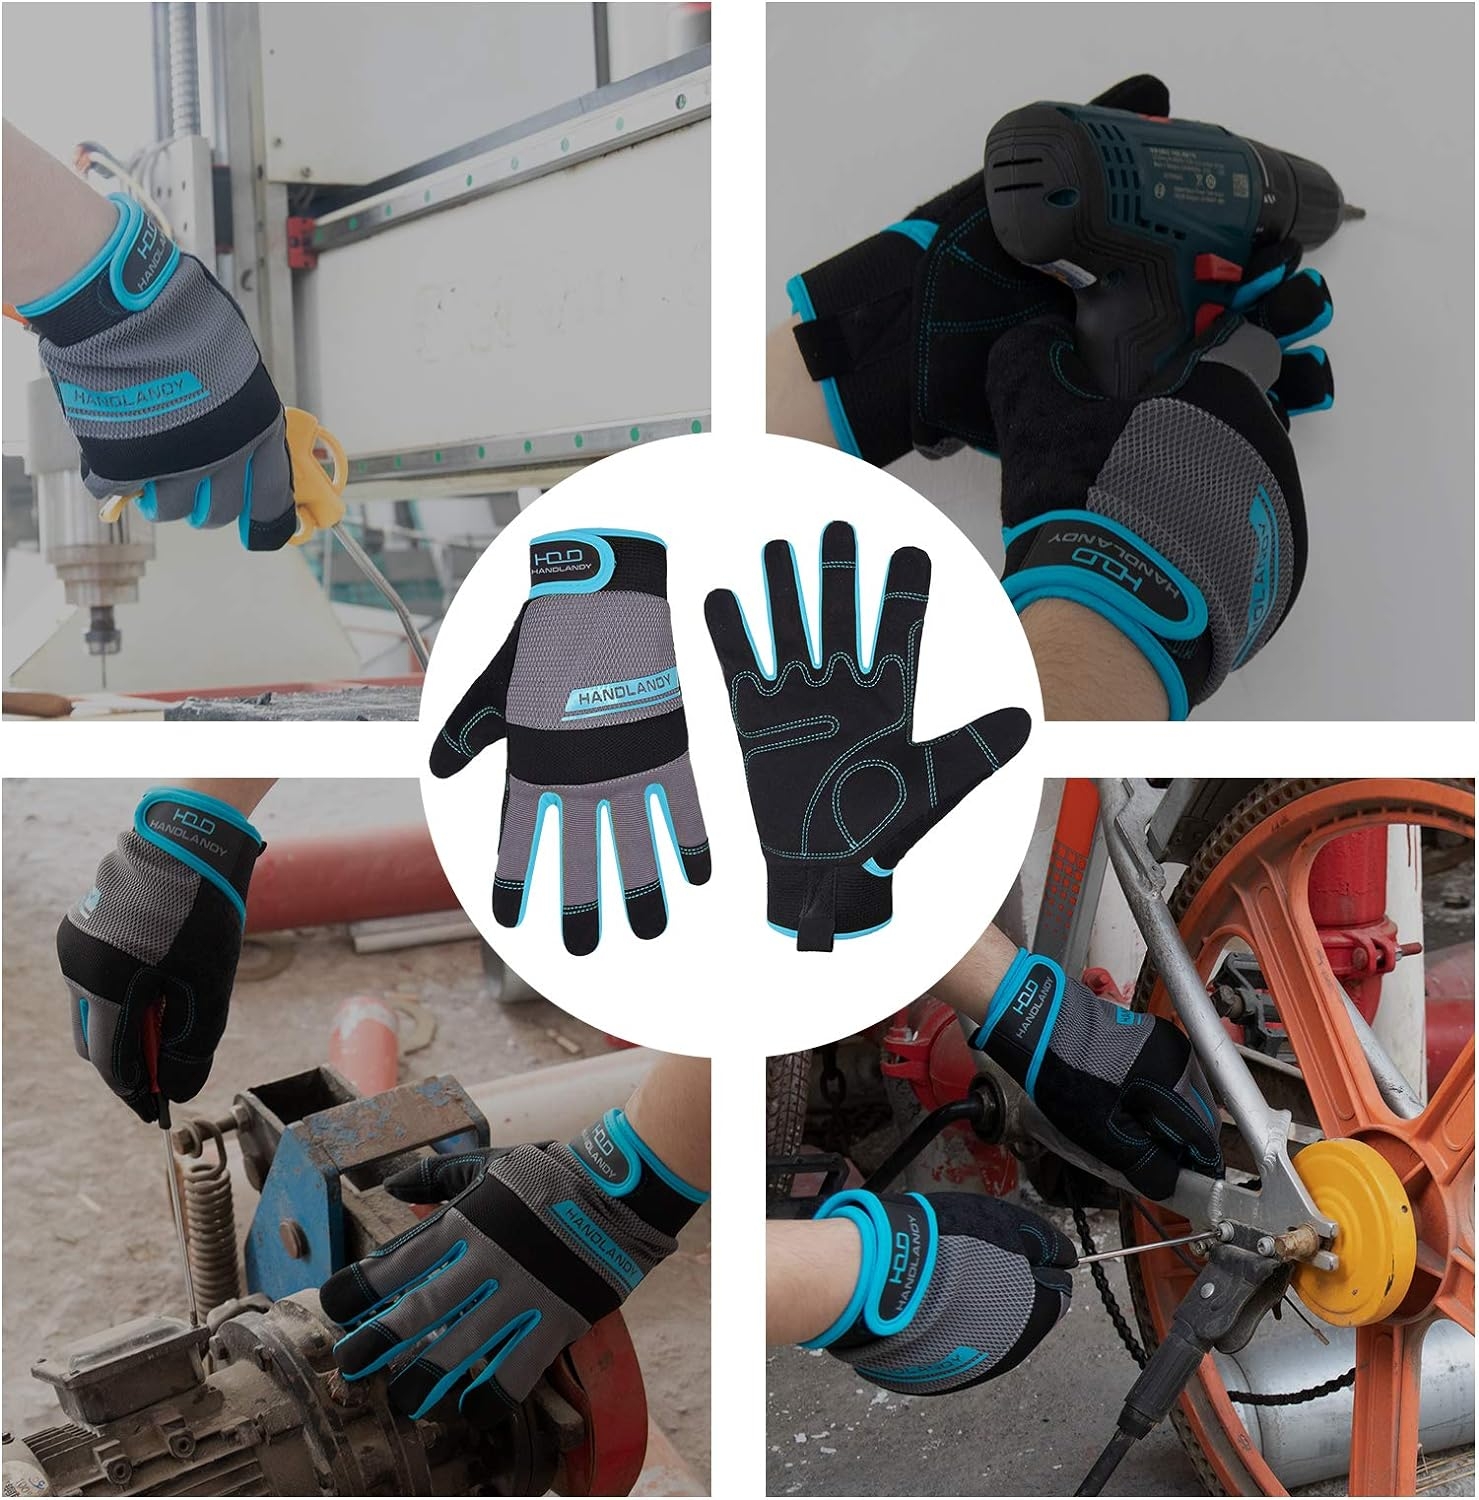 Synthetic Leather Work Safety Gloves for Men&Women,Mechanic Working Gloves Touchscreen